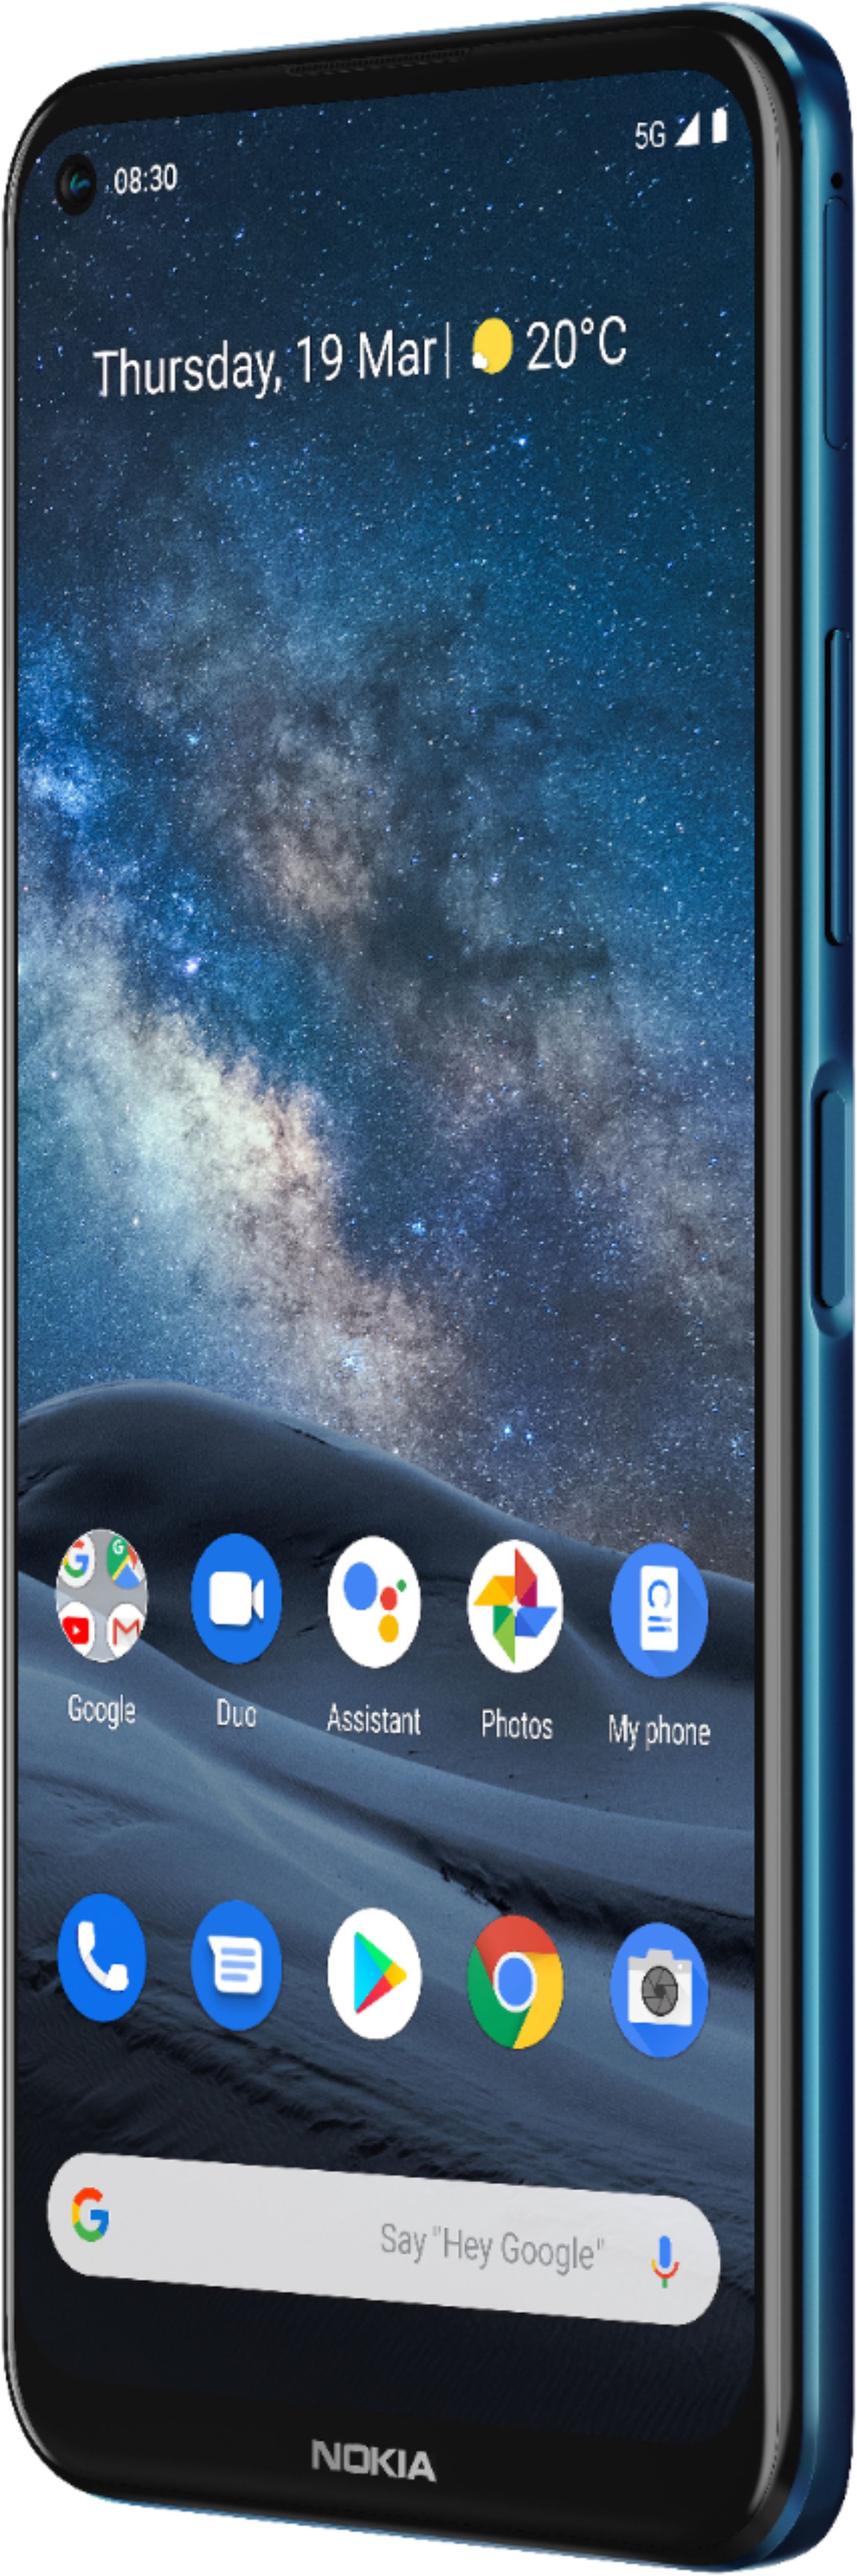 Left View: Google Pixel 4a with 5G - 5G smartphone - RAM 6 GB / Internal Memory 128 GB - OLED display - 6.2" - 2340 x 1080 pixels - 2x rear cameras 12.2 MP, 16 MP - front camera 8 MP - clearly white